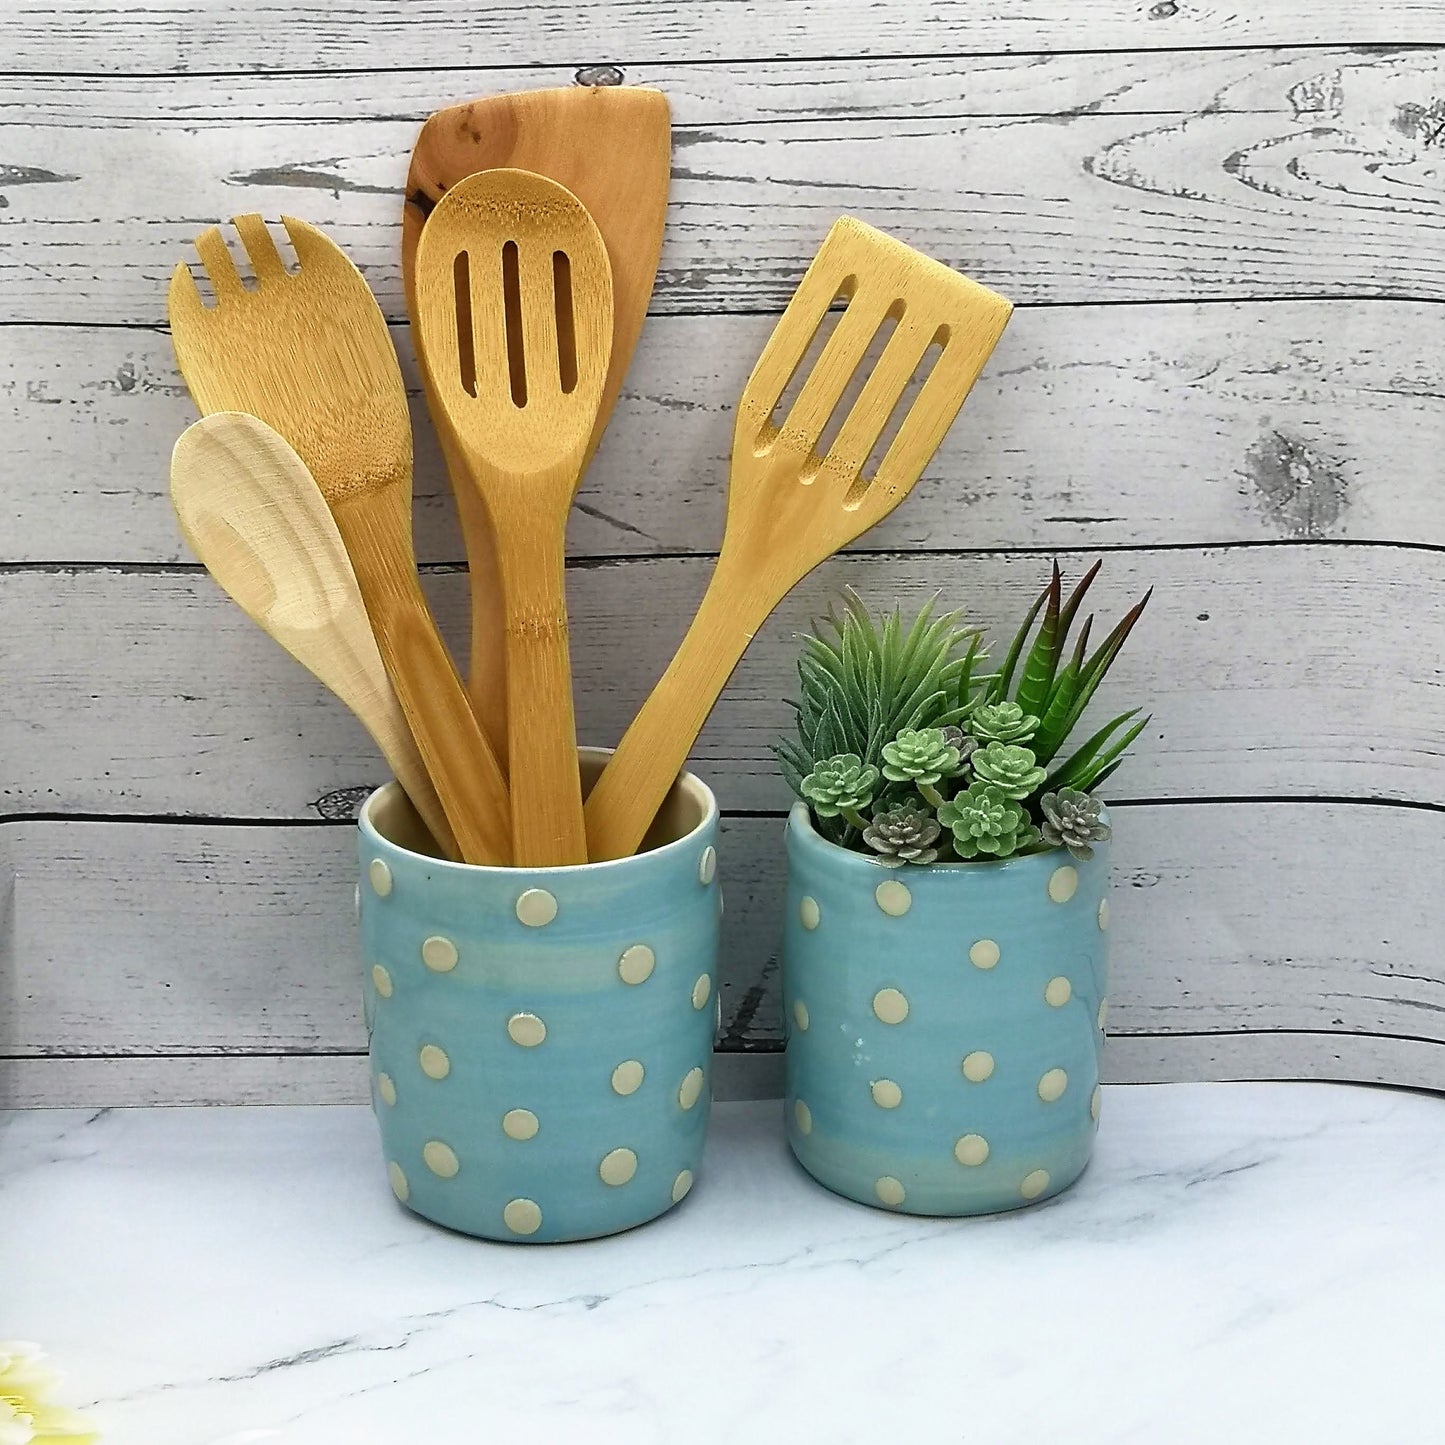 Large Utensil Holder For Kitchen Counter, Utensil Organizer Blue With White Dots, Unique Wedding Gift For Couple, Handmade New Home Gift - Ceramica Ana Rafael